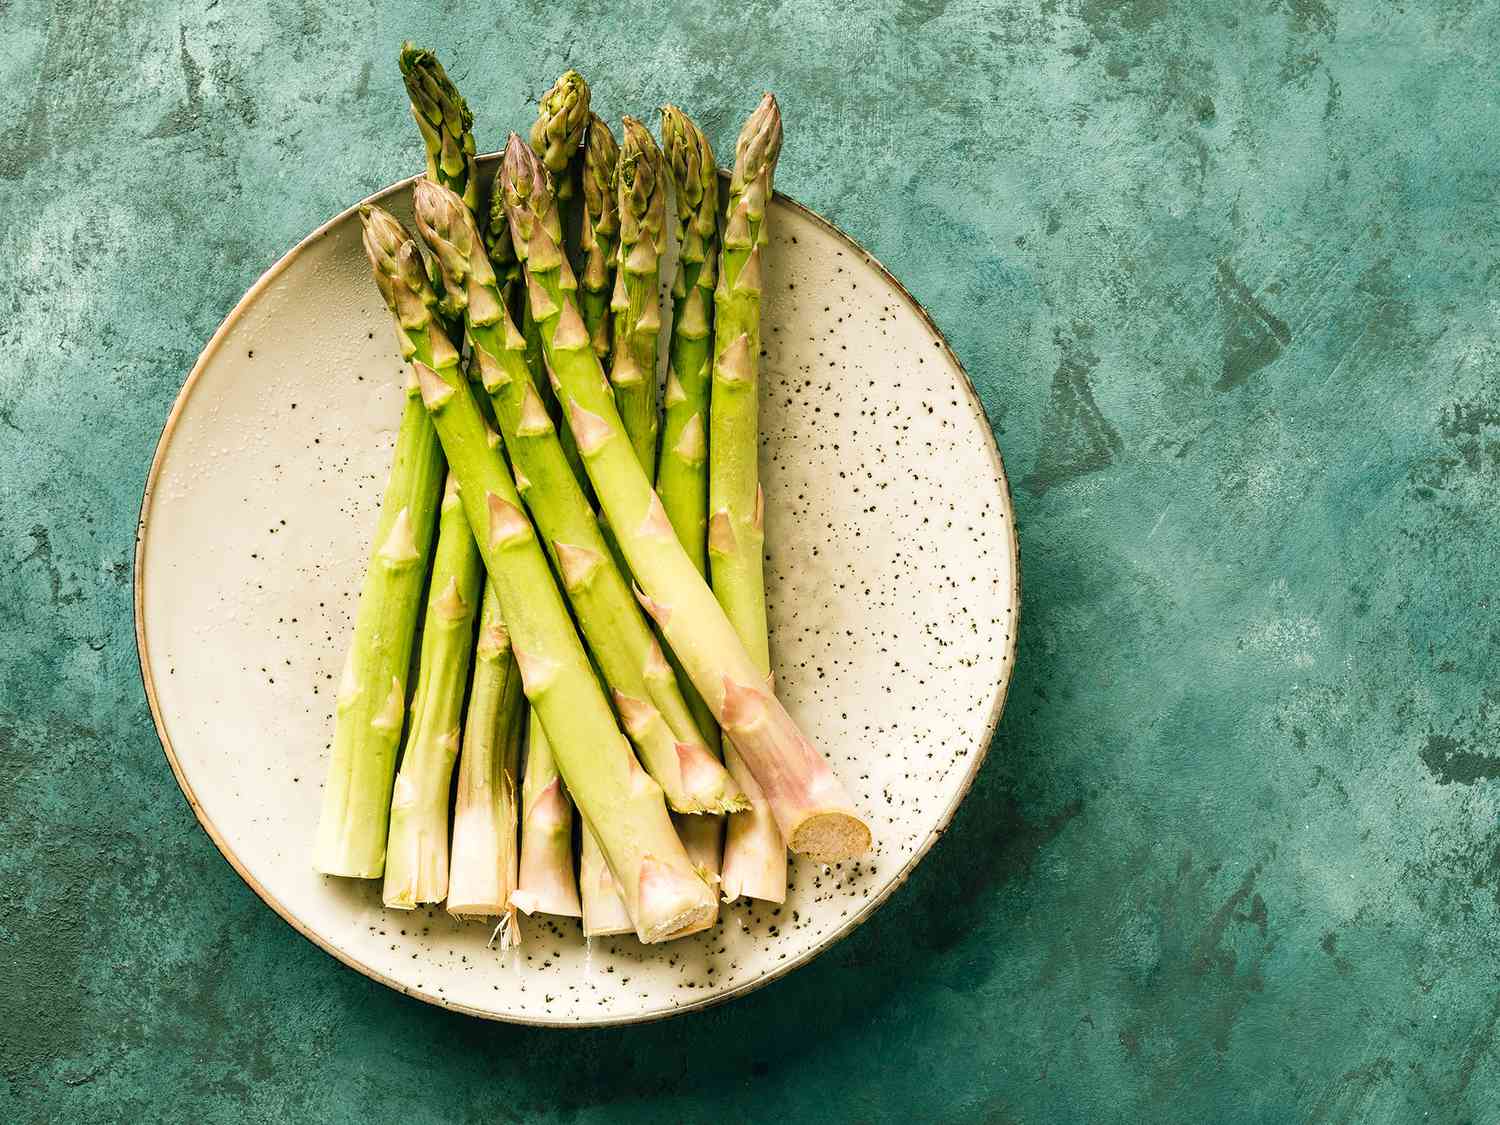 How To Store Uncooked Asparagus